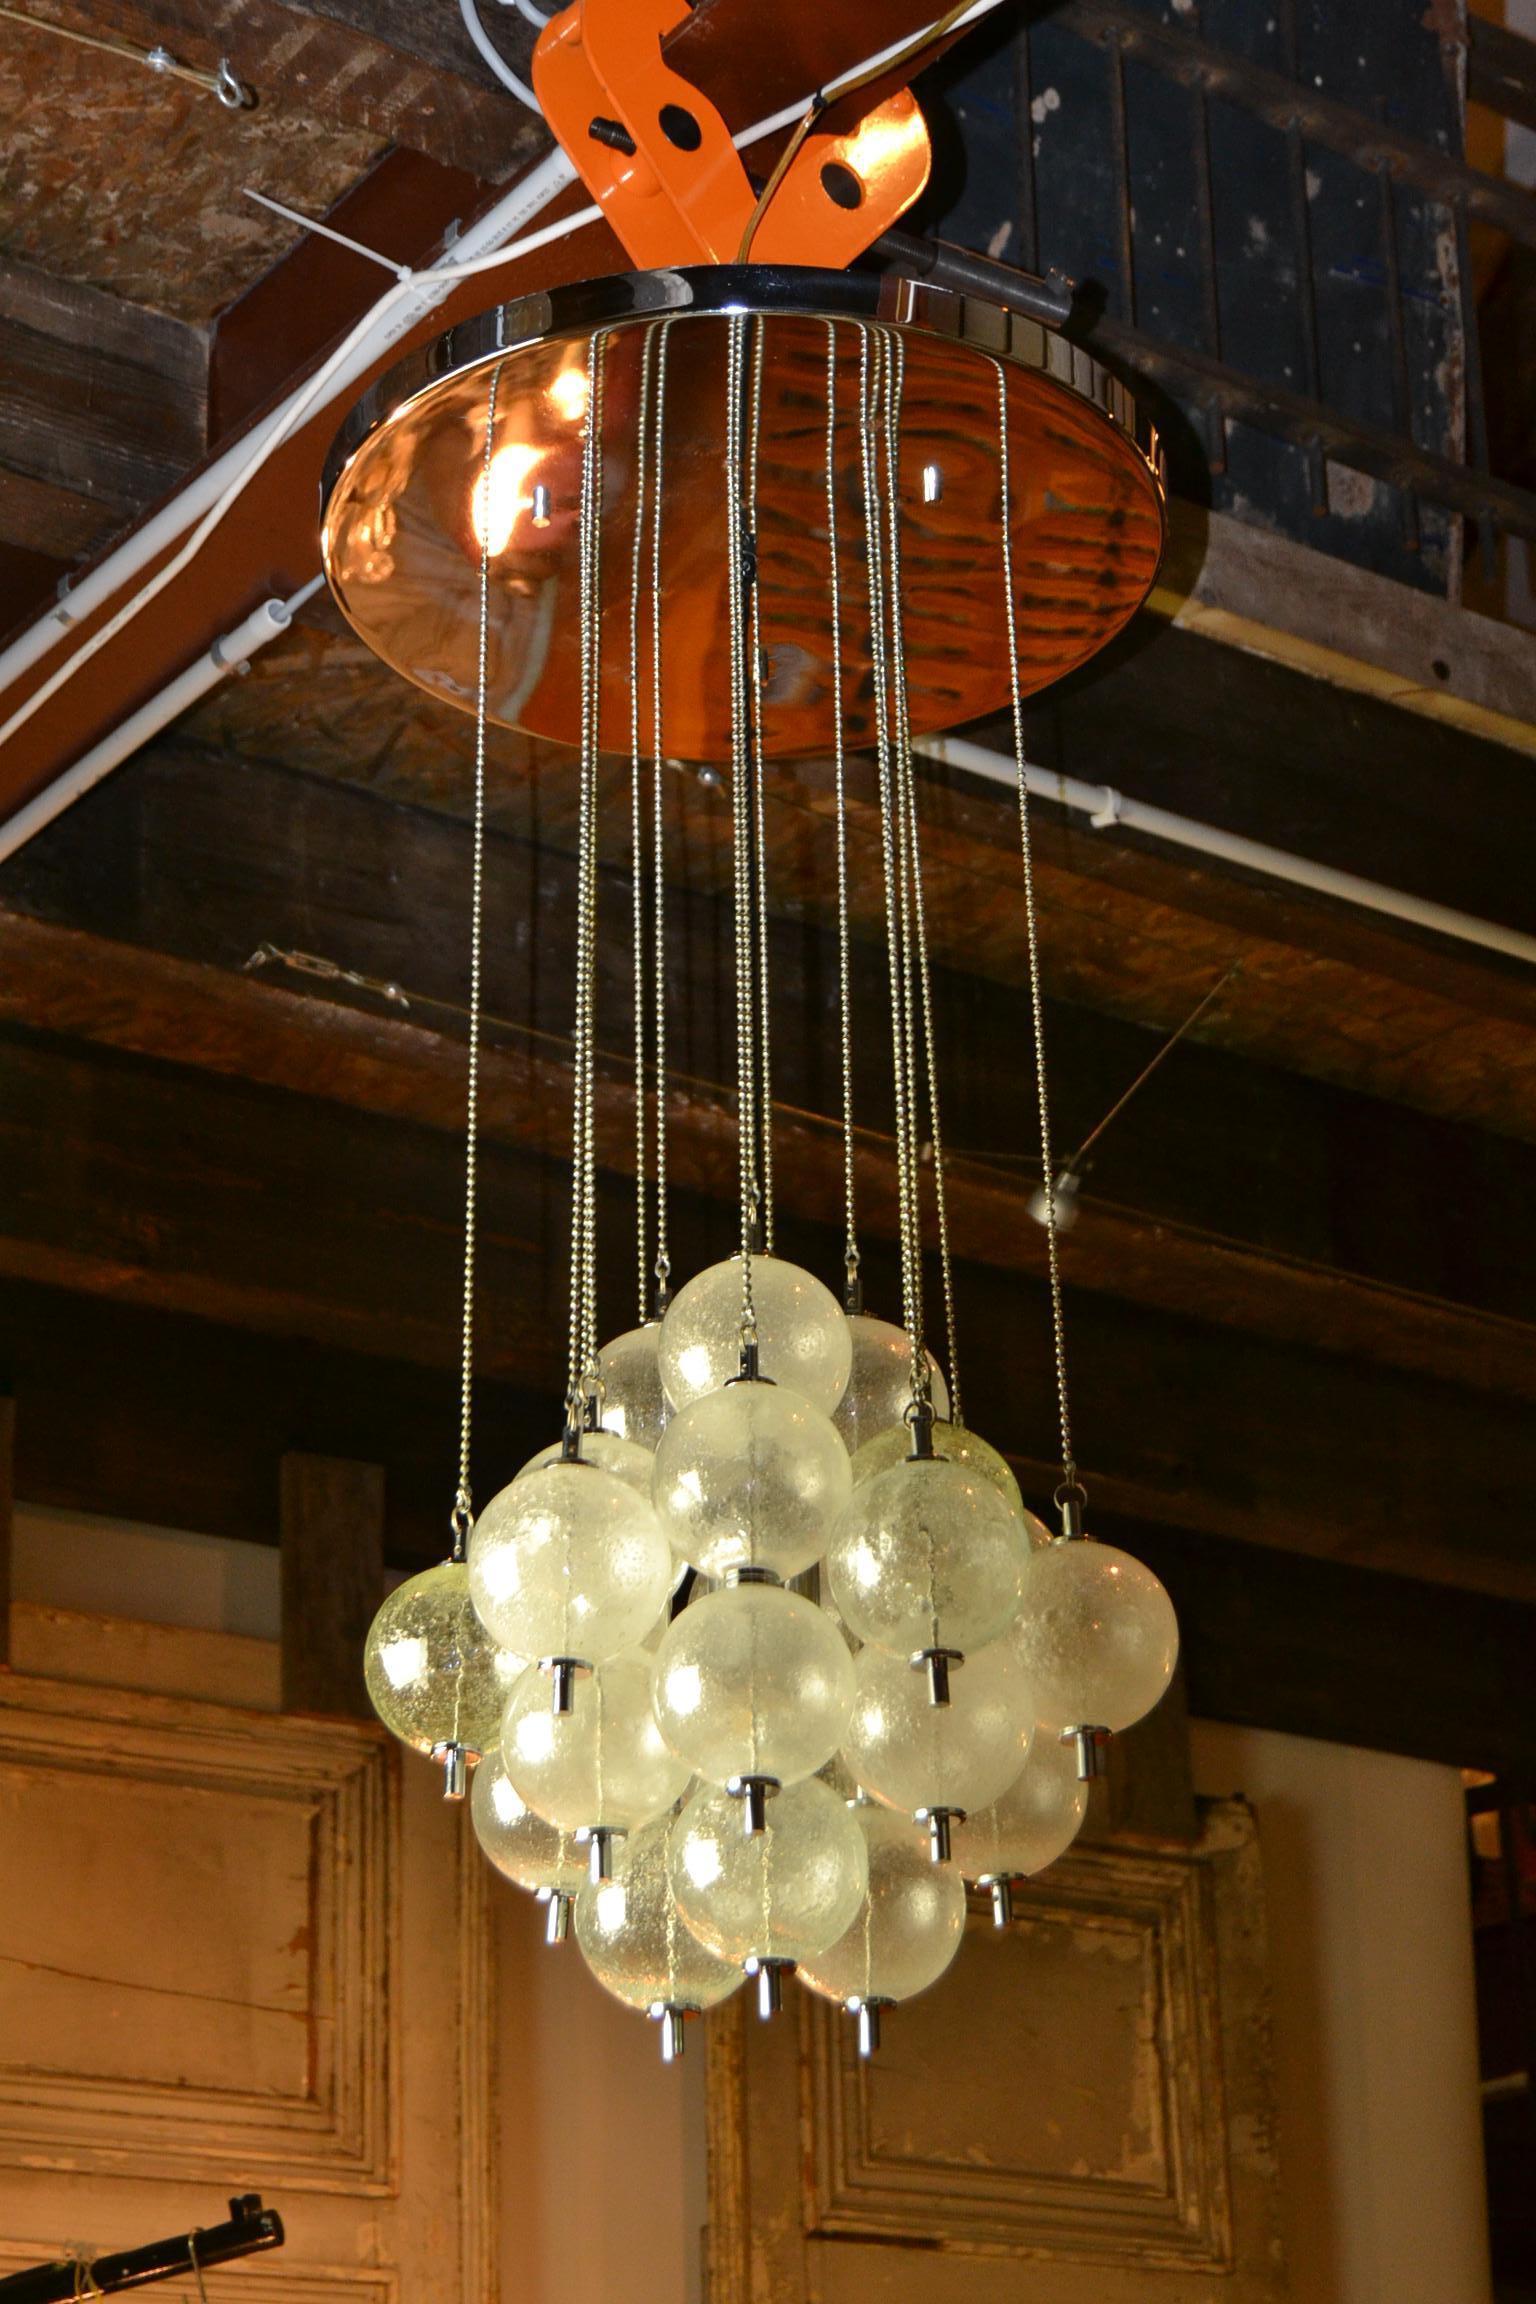 Mid-20th Century  Murano glass bubble chandelier - flush mount - ceiling light .
Raak Amsterdam - Seguso Italy 
Consisting of a chromed ceiling plate with lots of chains with Murano glass bubbles - glass balls.
In the centre of the 24 glass shades